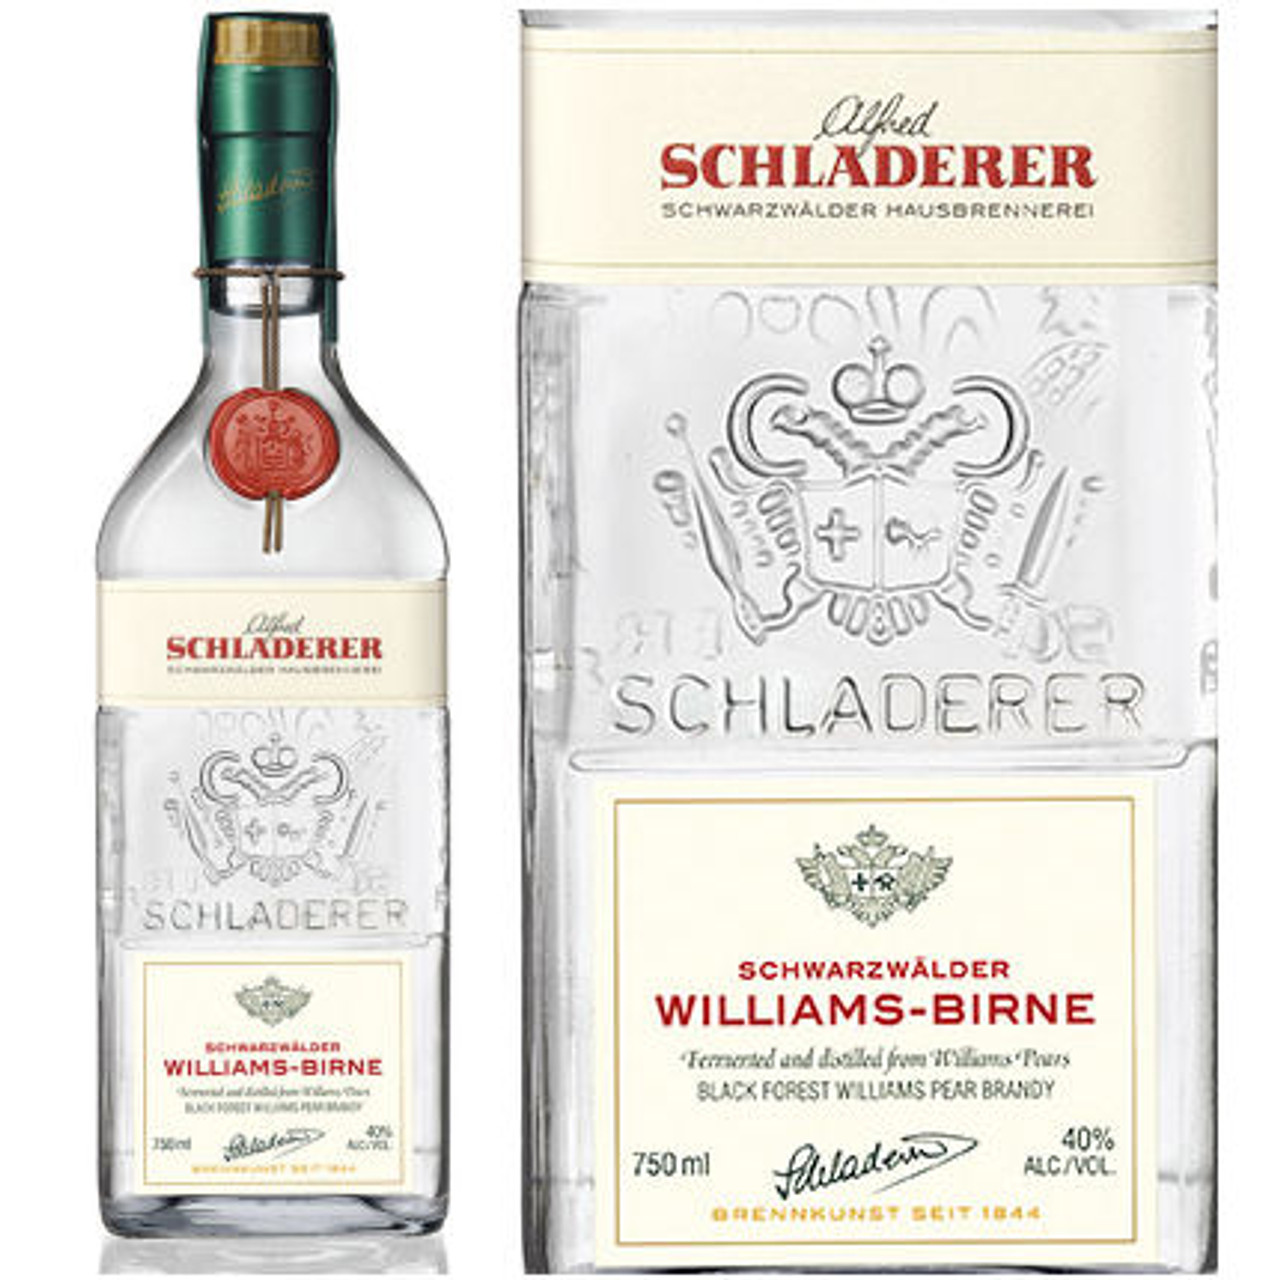 https://cdn11.bigcommerce.com/s-a04d0/images/stencil/1280x1280/products/7381/7815/schladerer-williams-birne-black-forest-pear-brandy__12924.1661917683.jpg?c=2